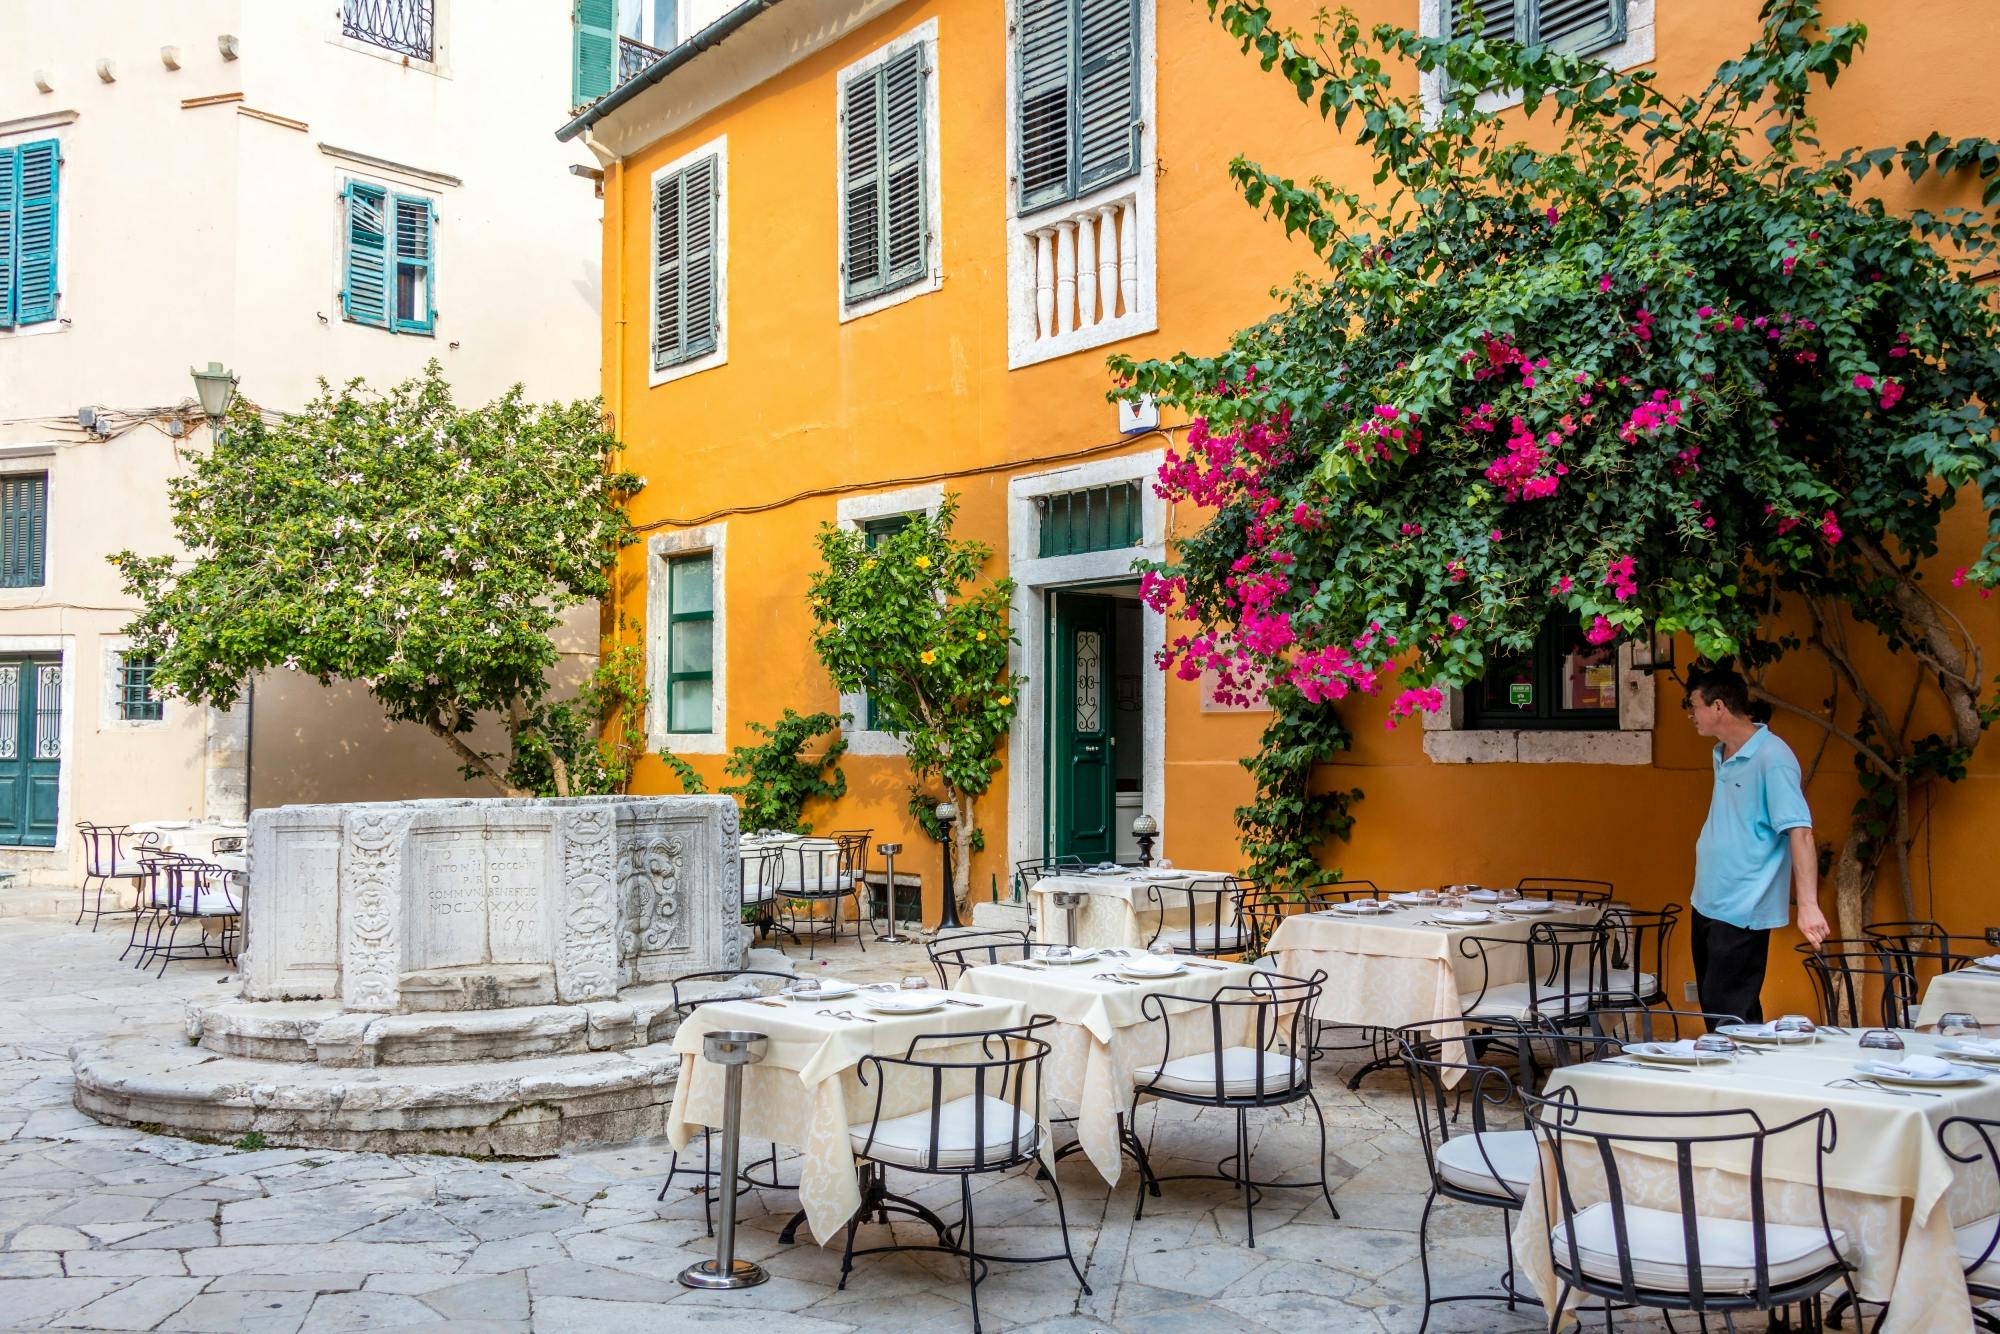 Corfu Old Town Guided Tour with Casa Parlante Museum